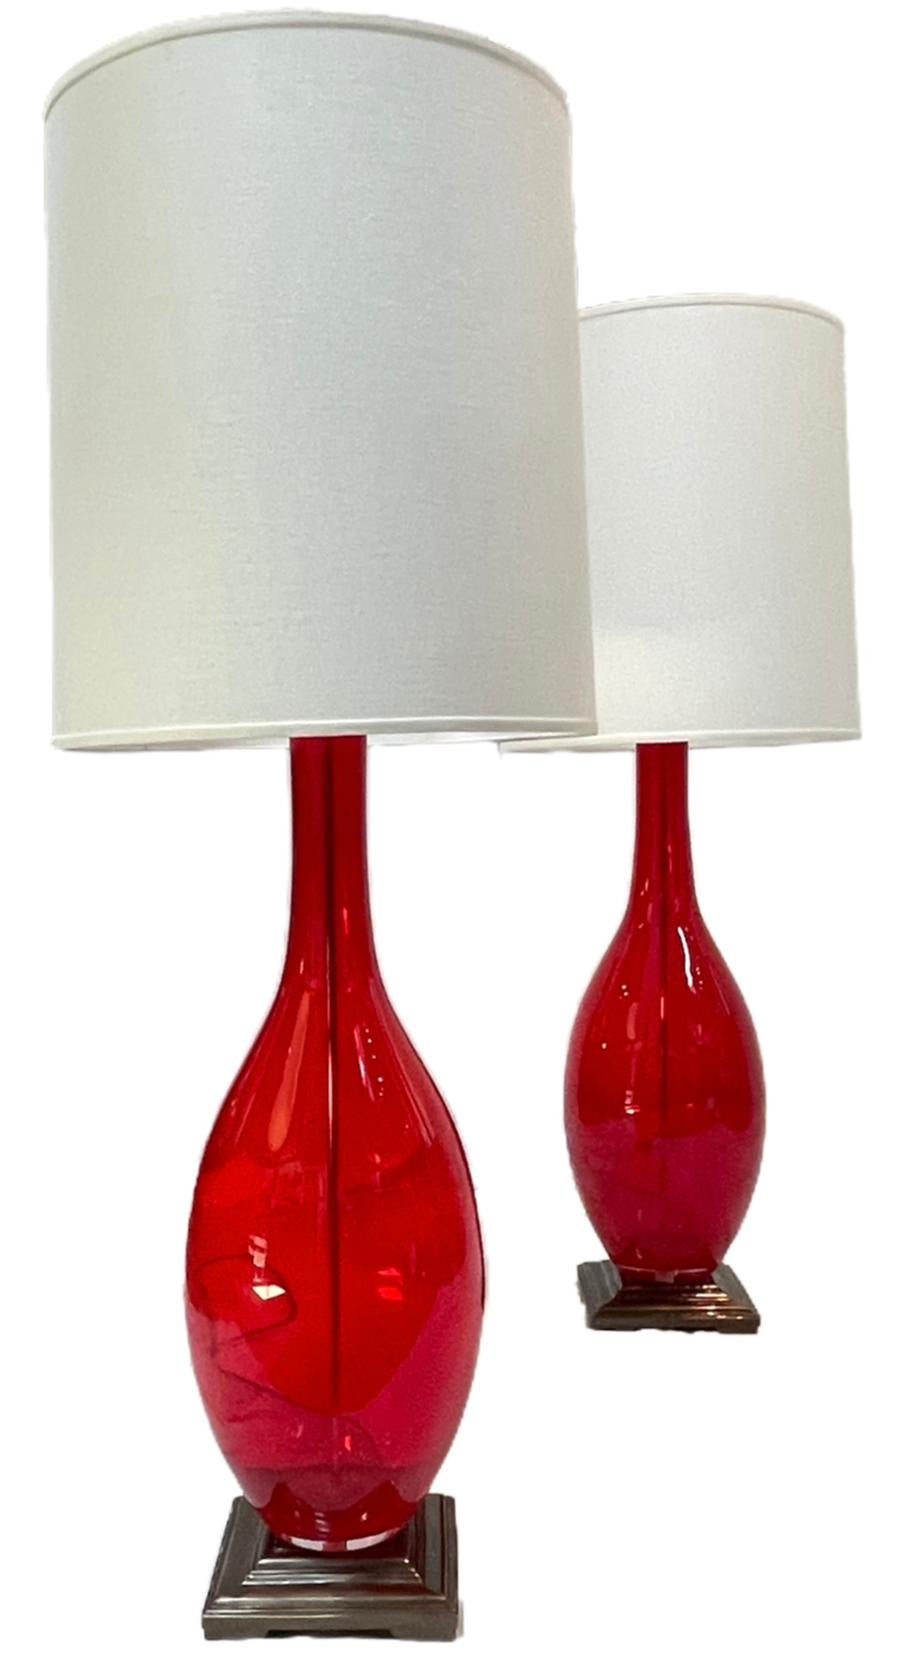 Big, beautiful, and bold! Standing at over 4 ft high, these lamps demand the attention of any space. 
Design Guild art glass table lamps. Made in Poland, 20th century

Measures: 49”H x 10.5”W x 18”D

18” diameter of shade.